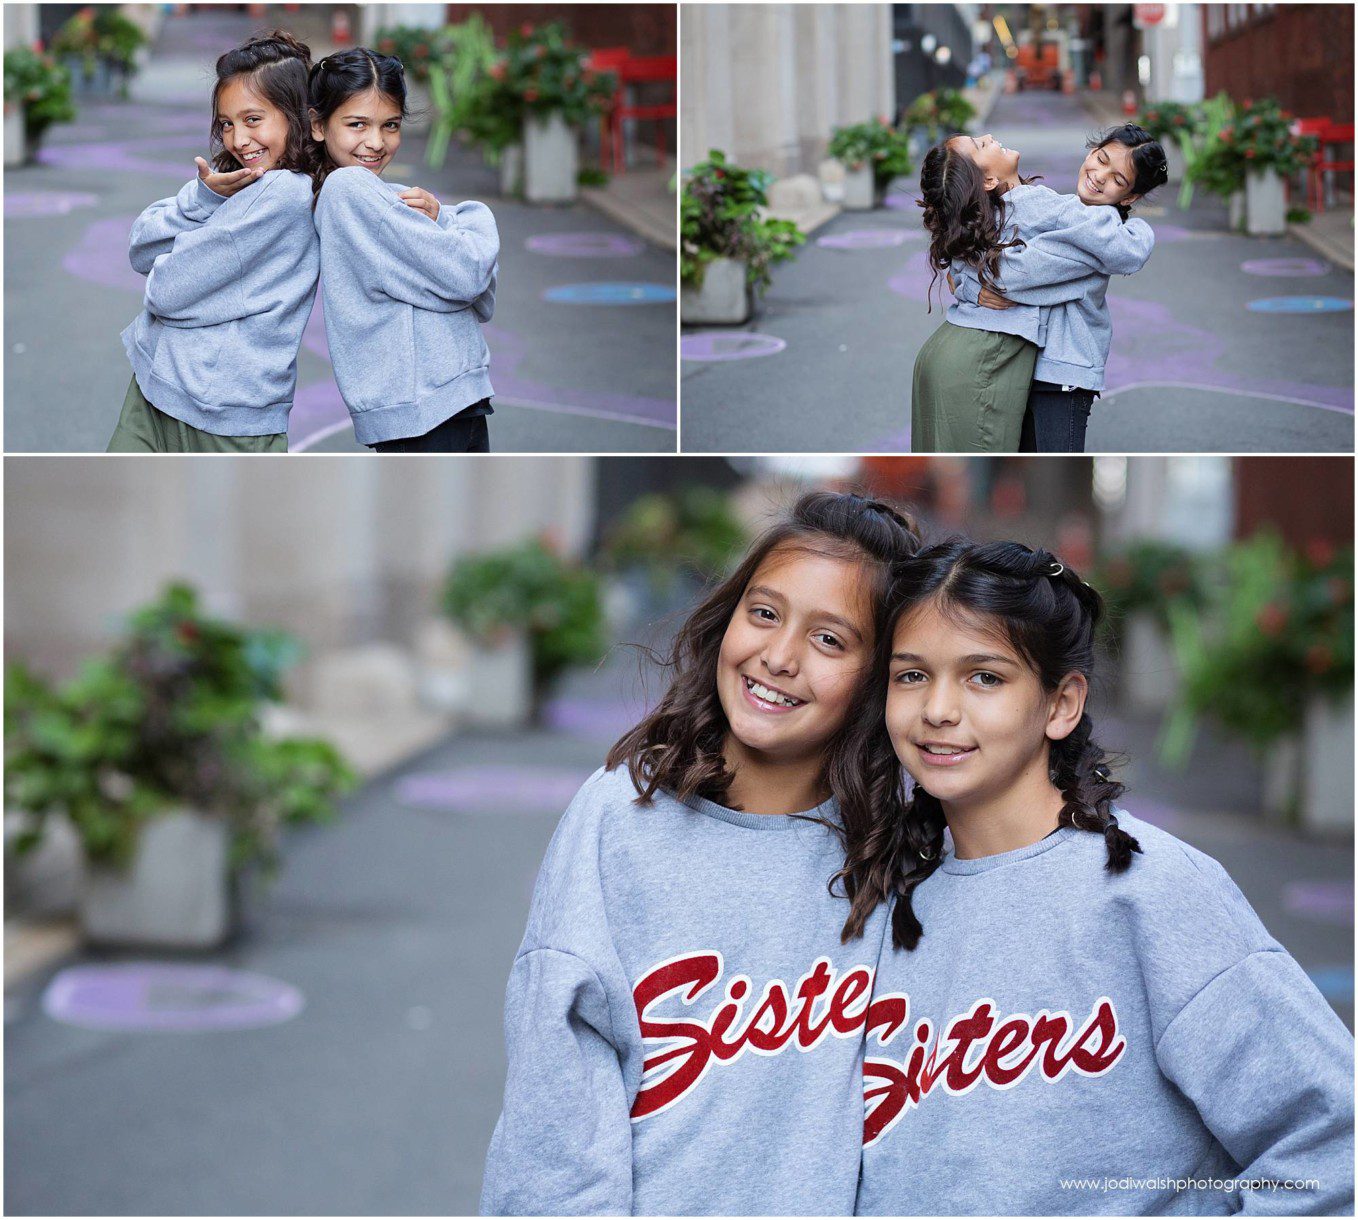 images of tween sisters wearing sisters sweatshirts in a Pittsburgh alley.  They both of dark hair and are about the same size.  They're laughing and hugging and smiling at the camera.